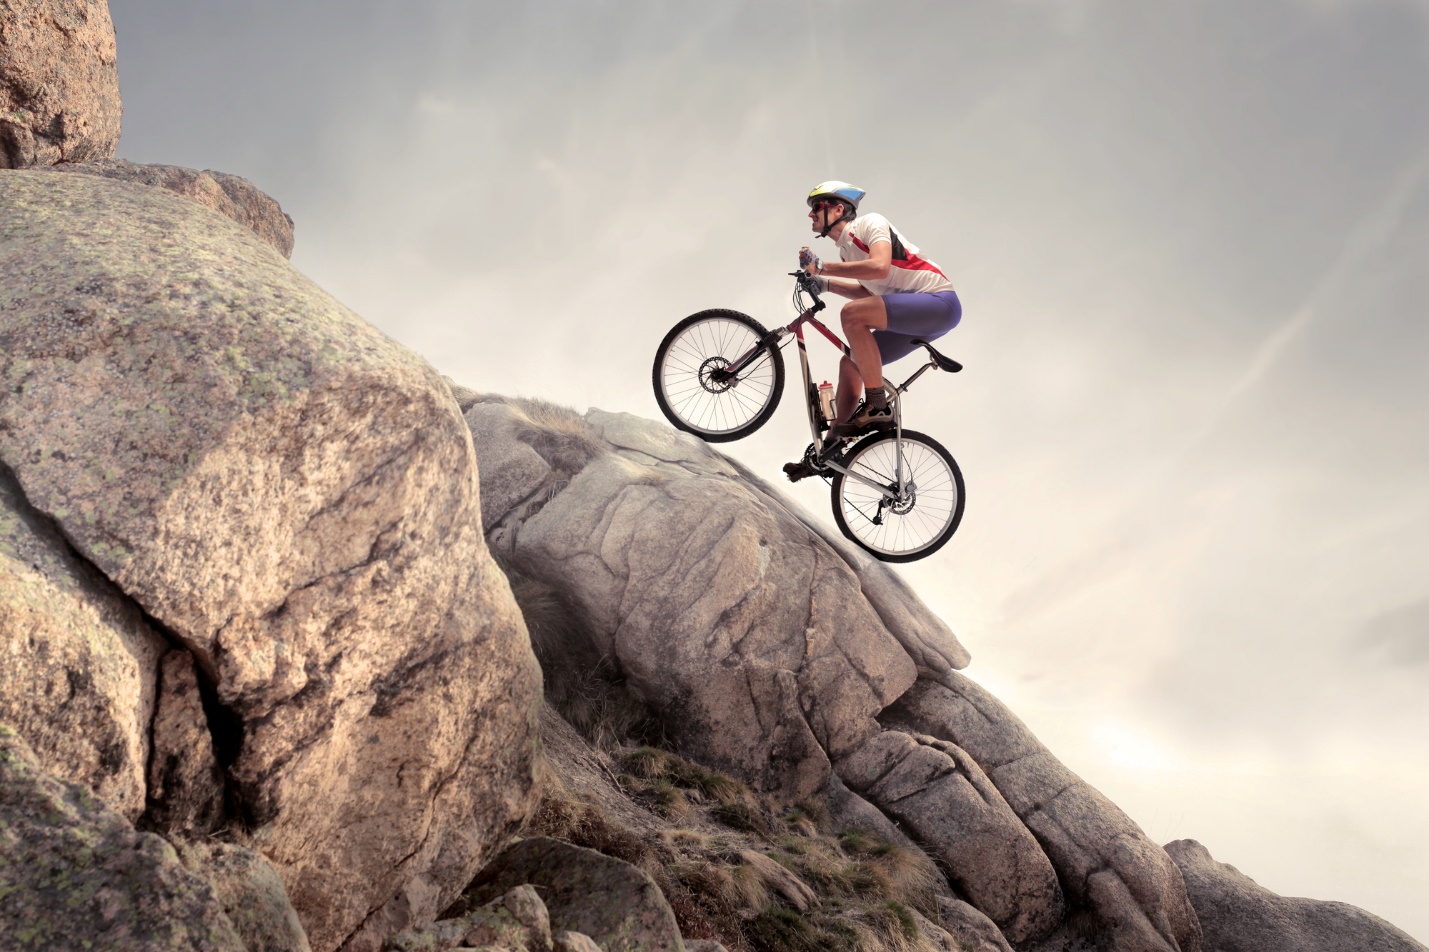 A person riding a bike on a rock

Description automatically generated with medium confidence